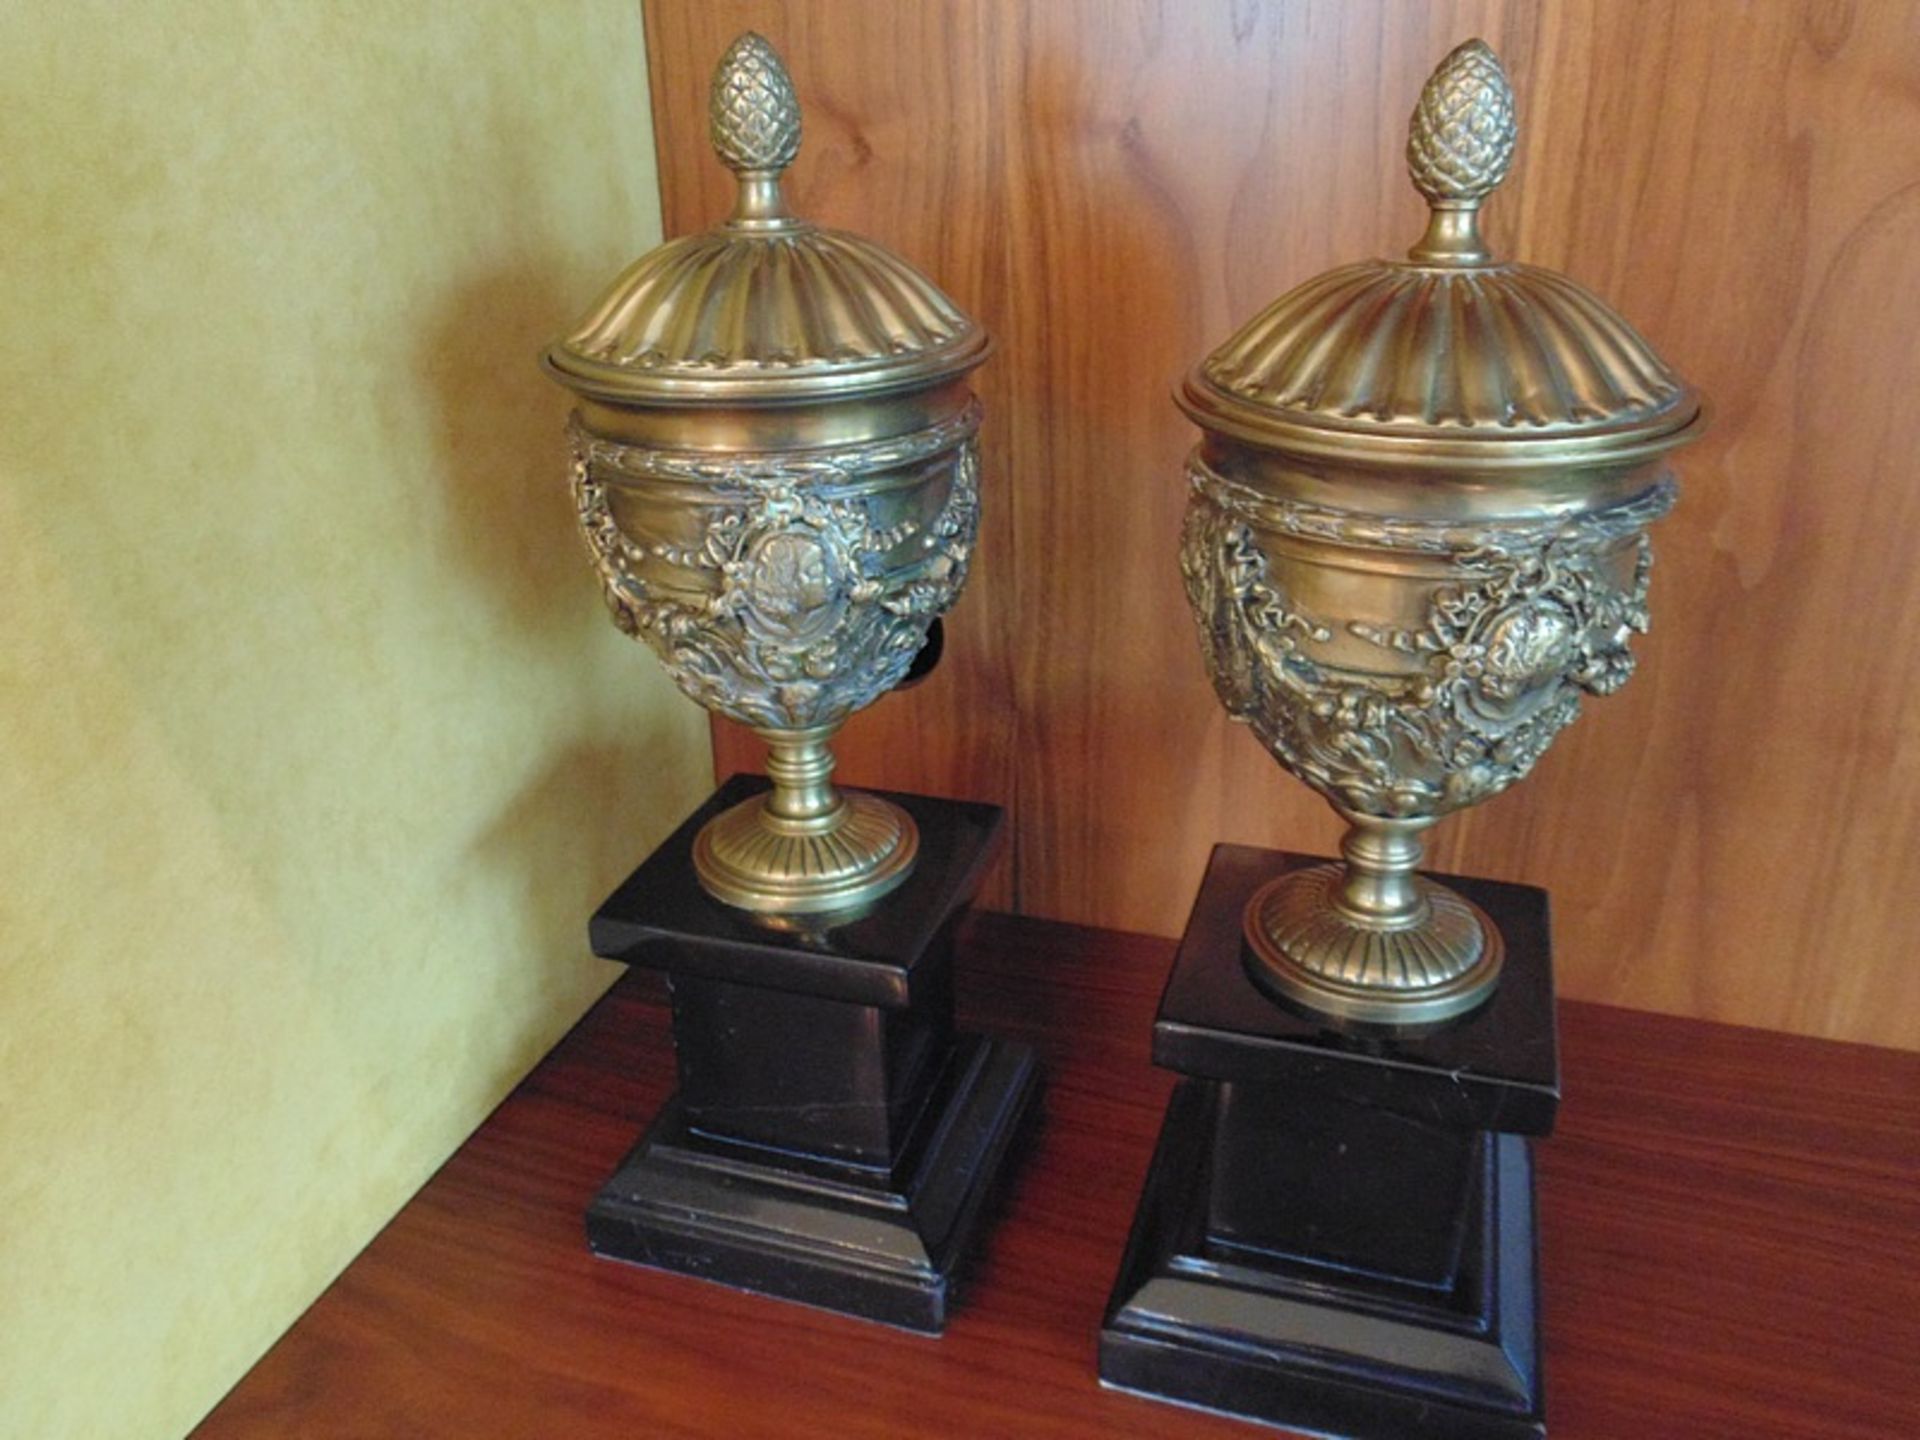 A pair of Italian Neoclassical gilt bronze urns cast in relief mounted on a black marble plinth - Image 2 of 3